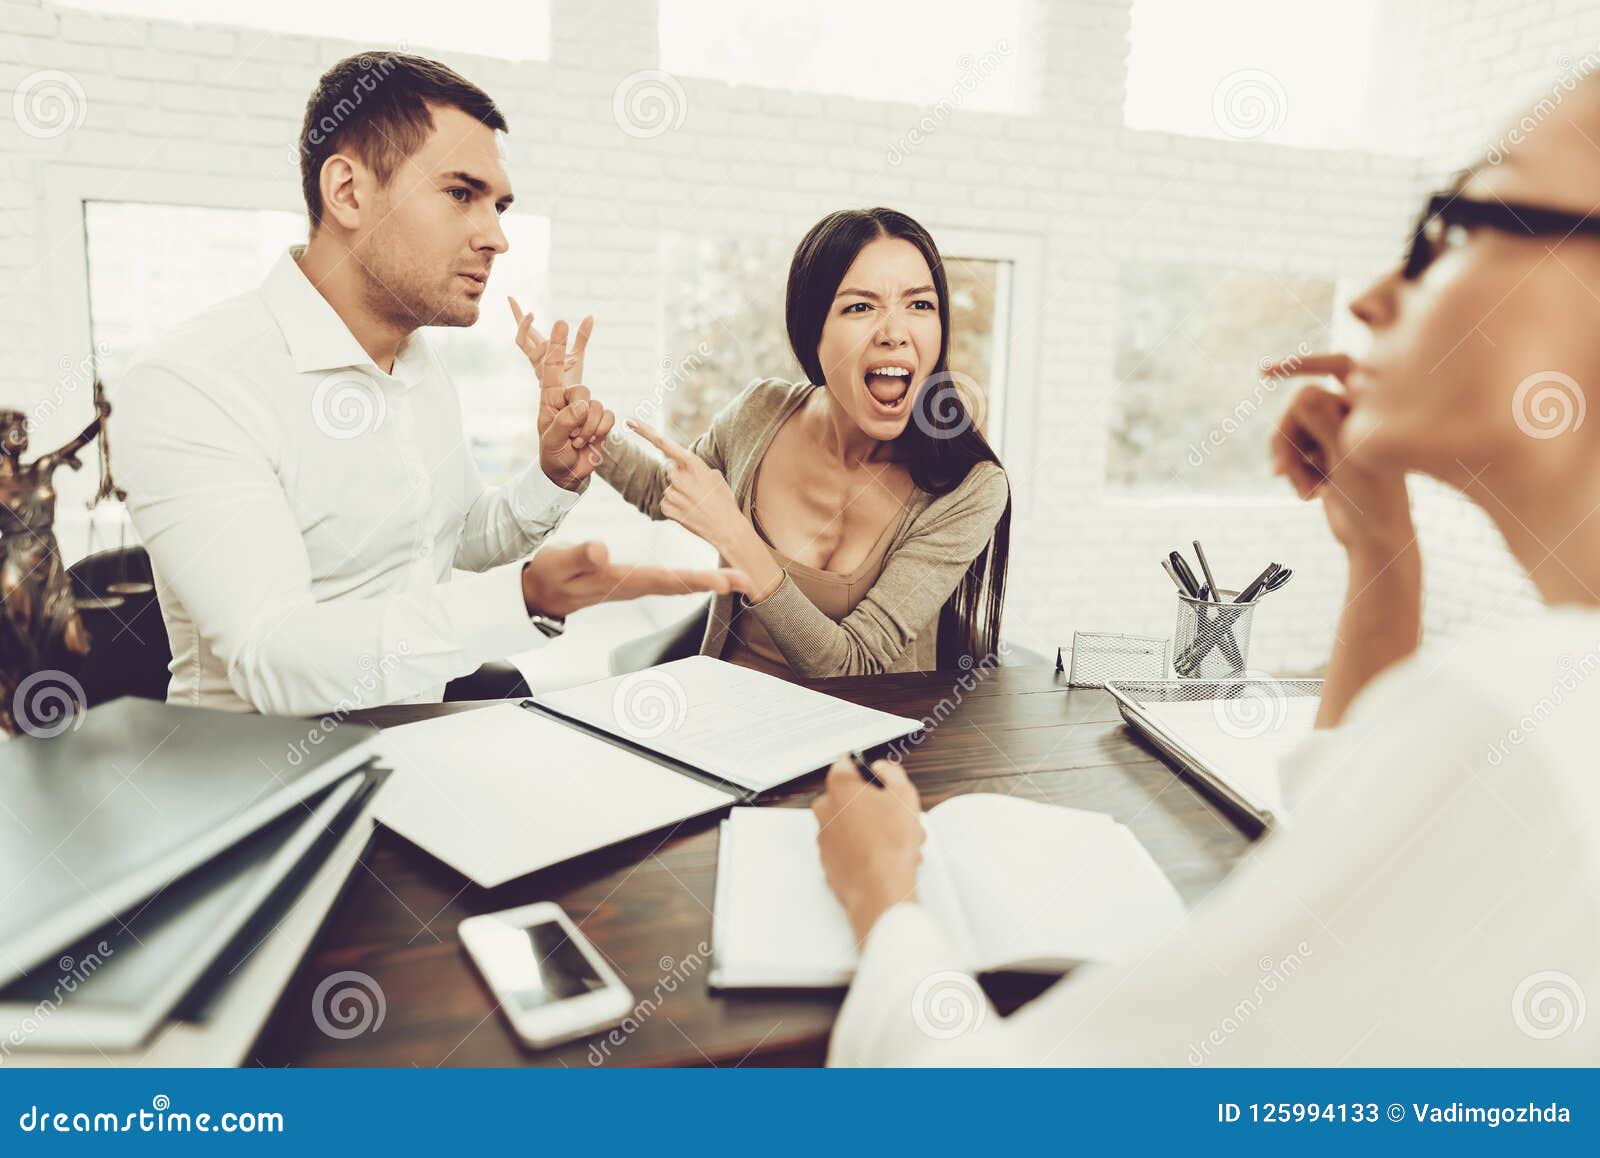 Upset Husband And Angry Wife In Office With Lawyer Stock Image Image